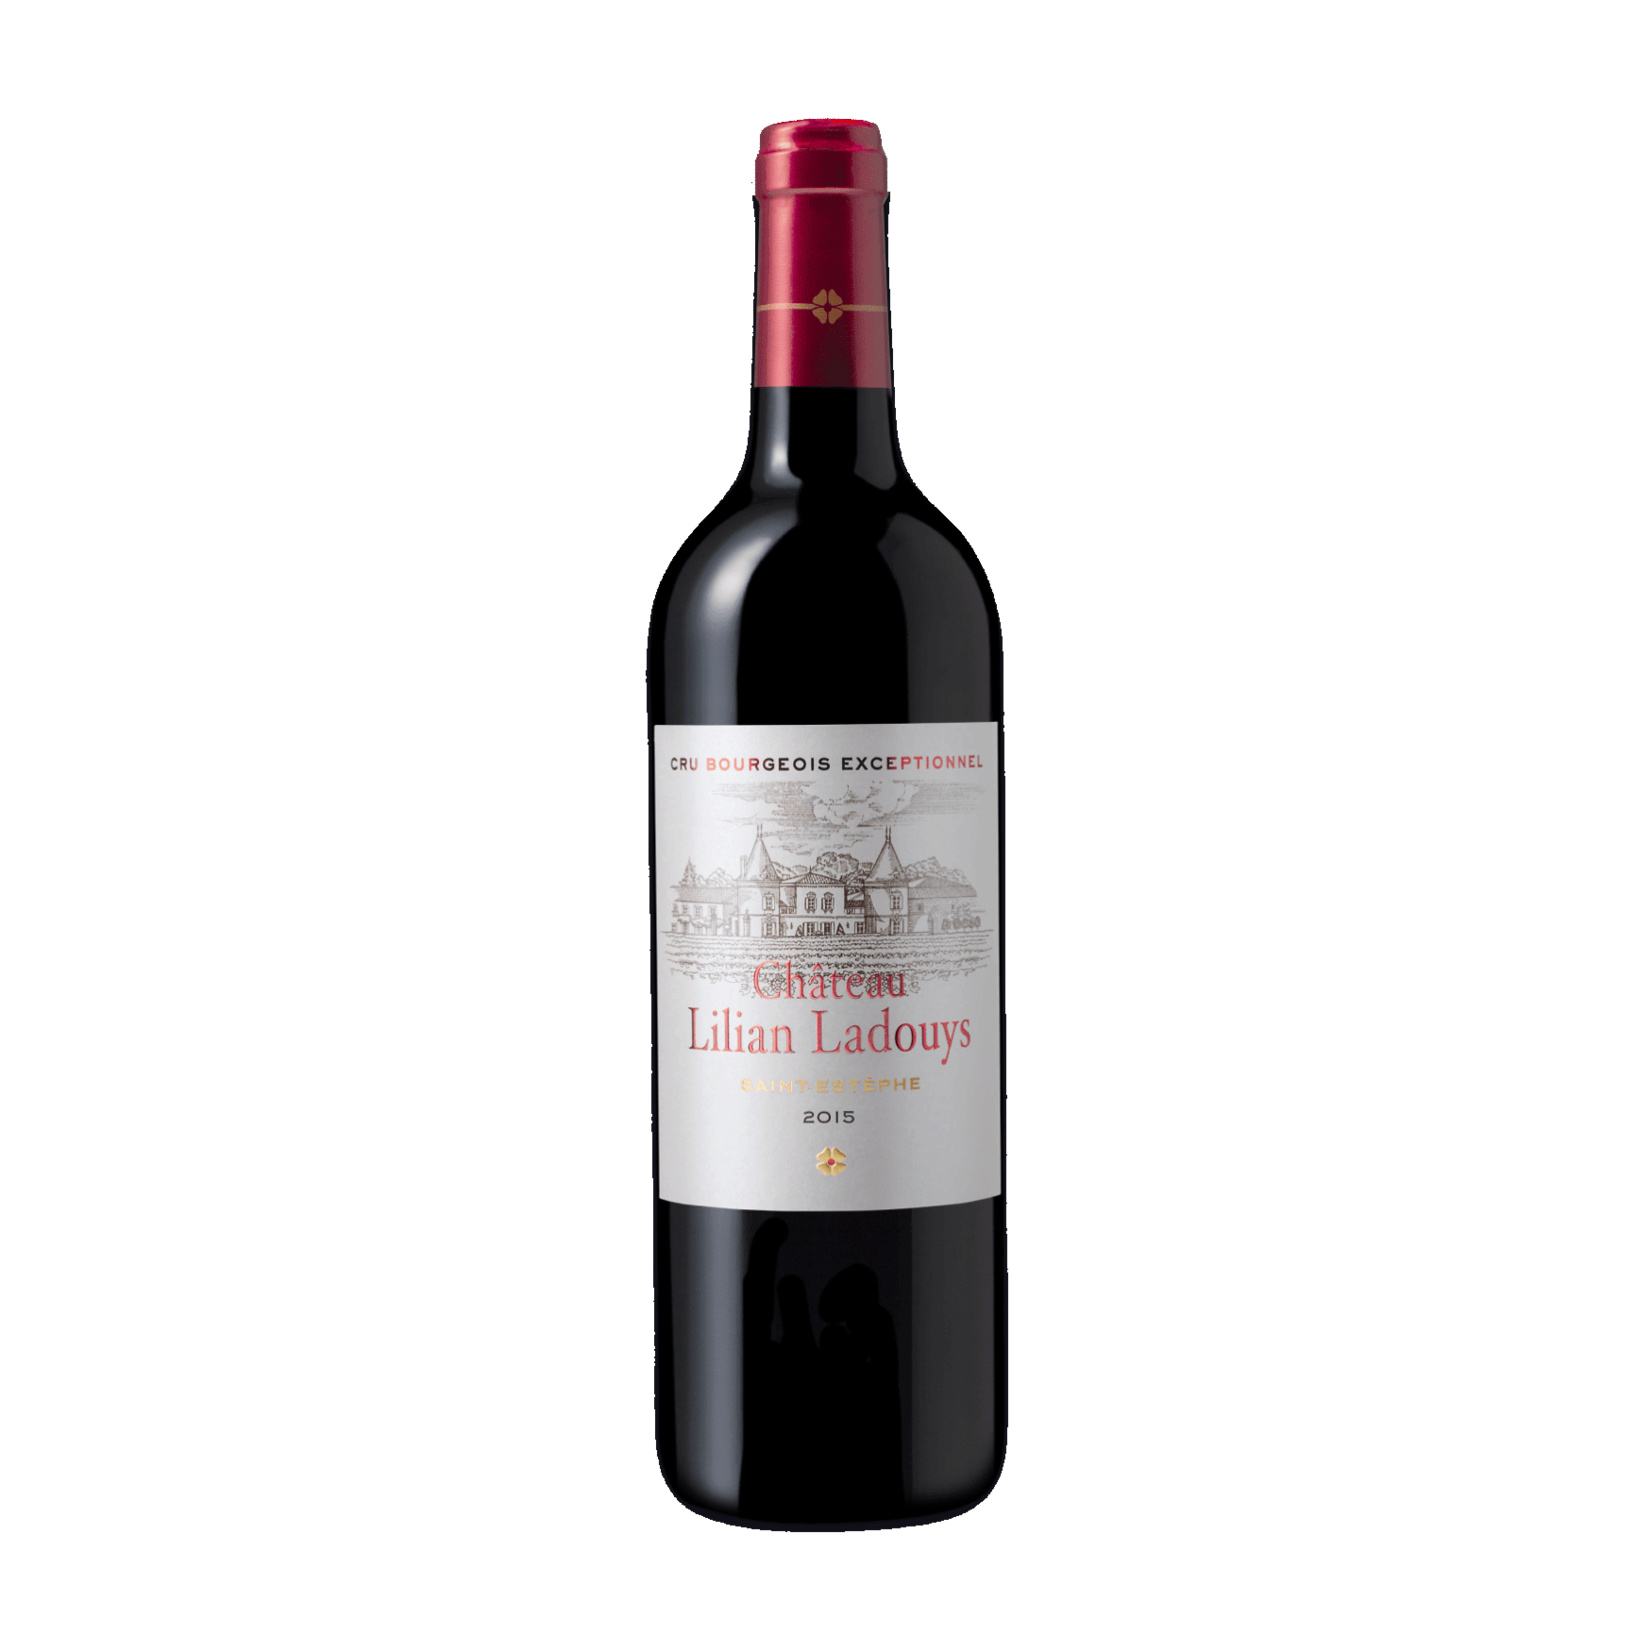 Wine Chateau Lilian Ladouys 2015